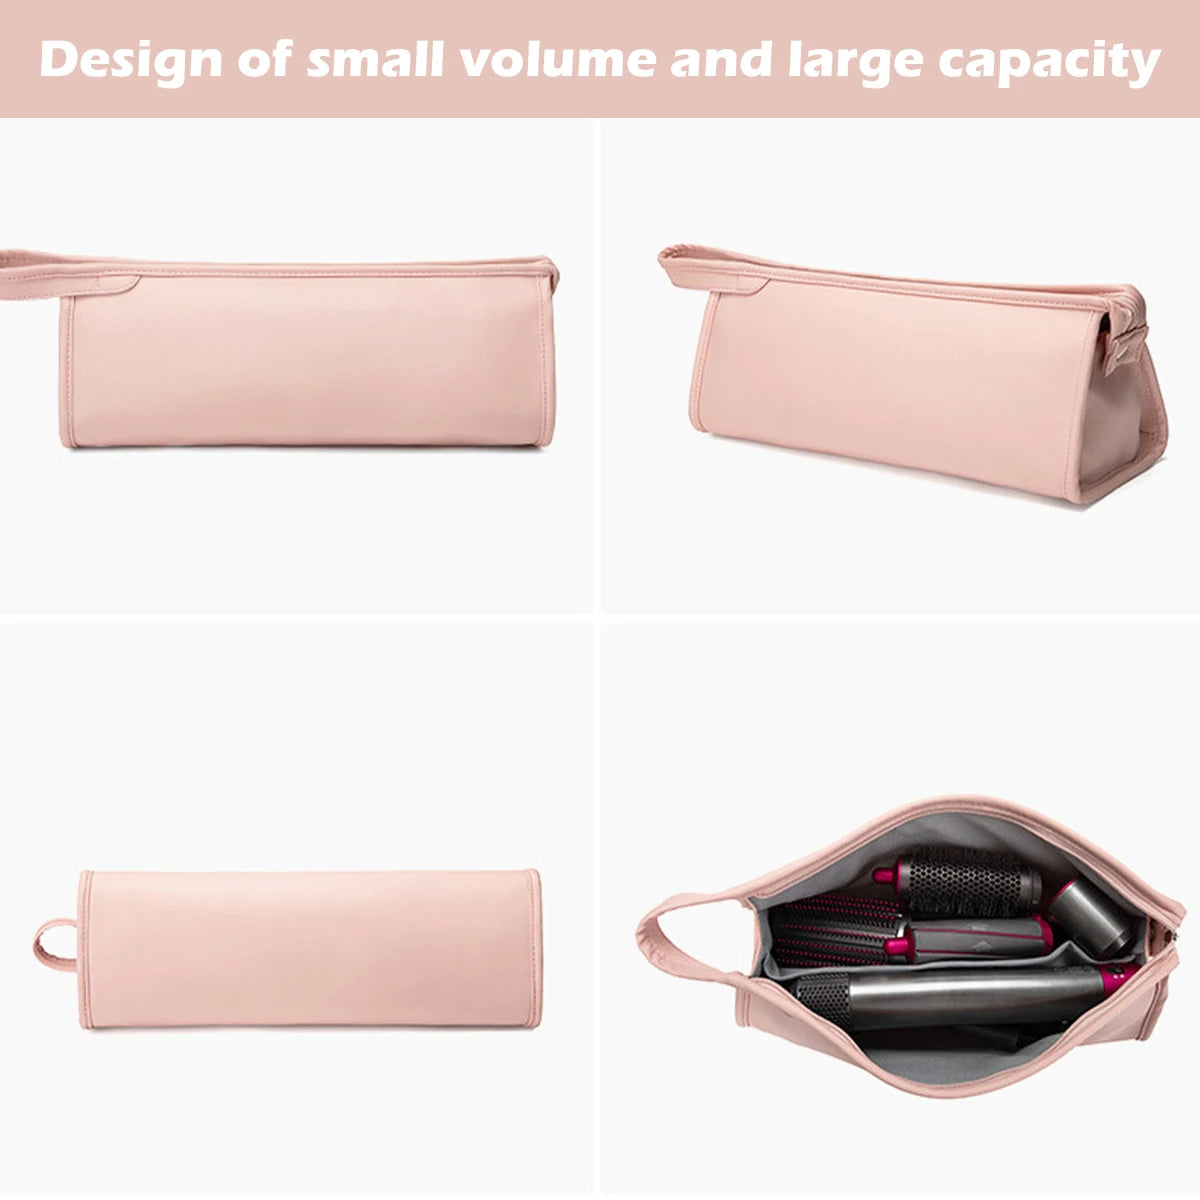 Amica Mighty Mini Ionic Hair Dryer & Case | Ionic hair dryer, Travel size  products, Dry pack